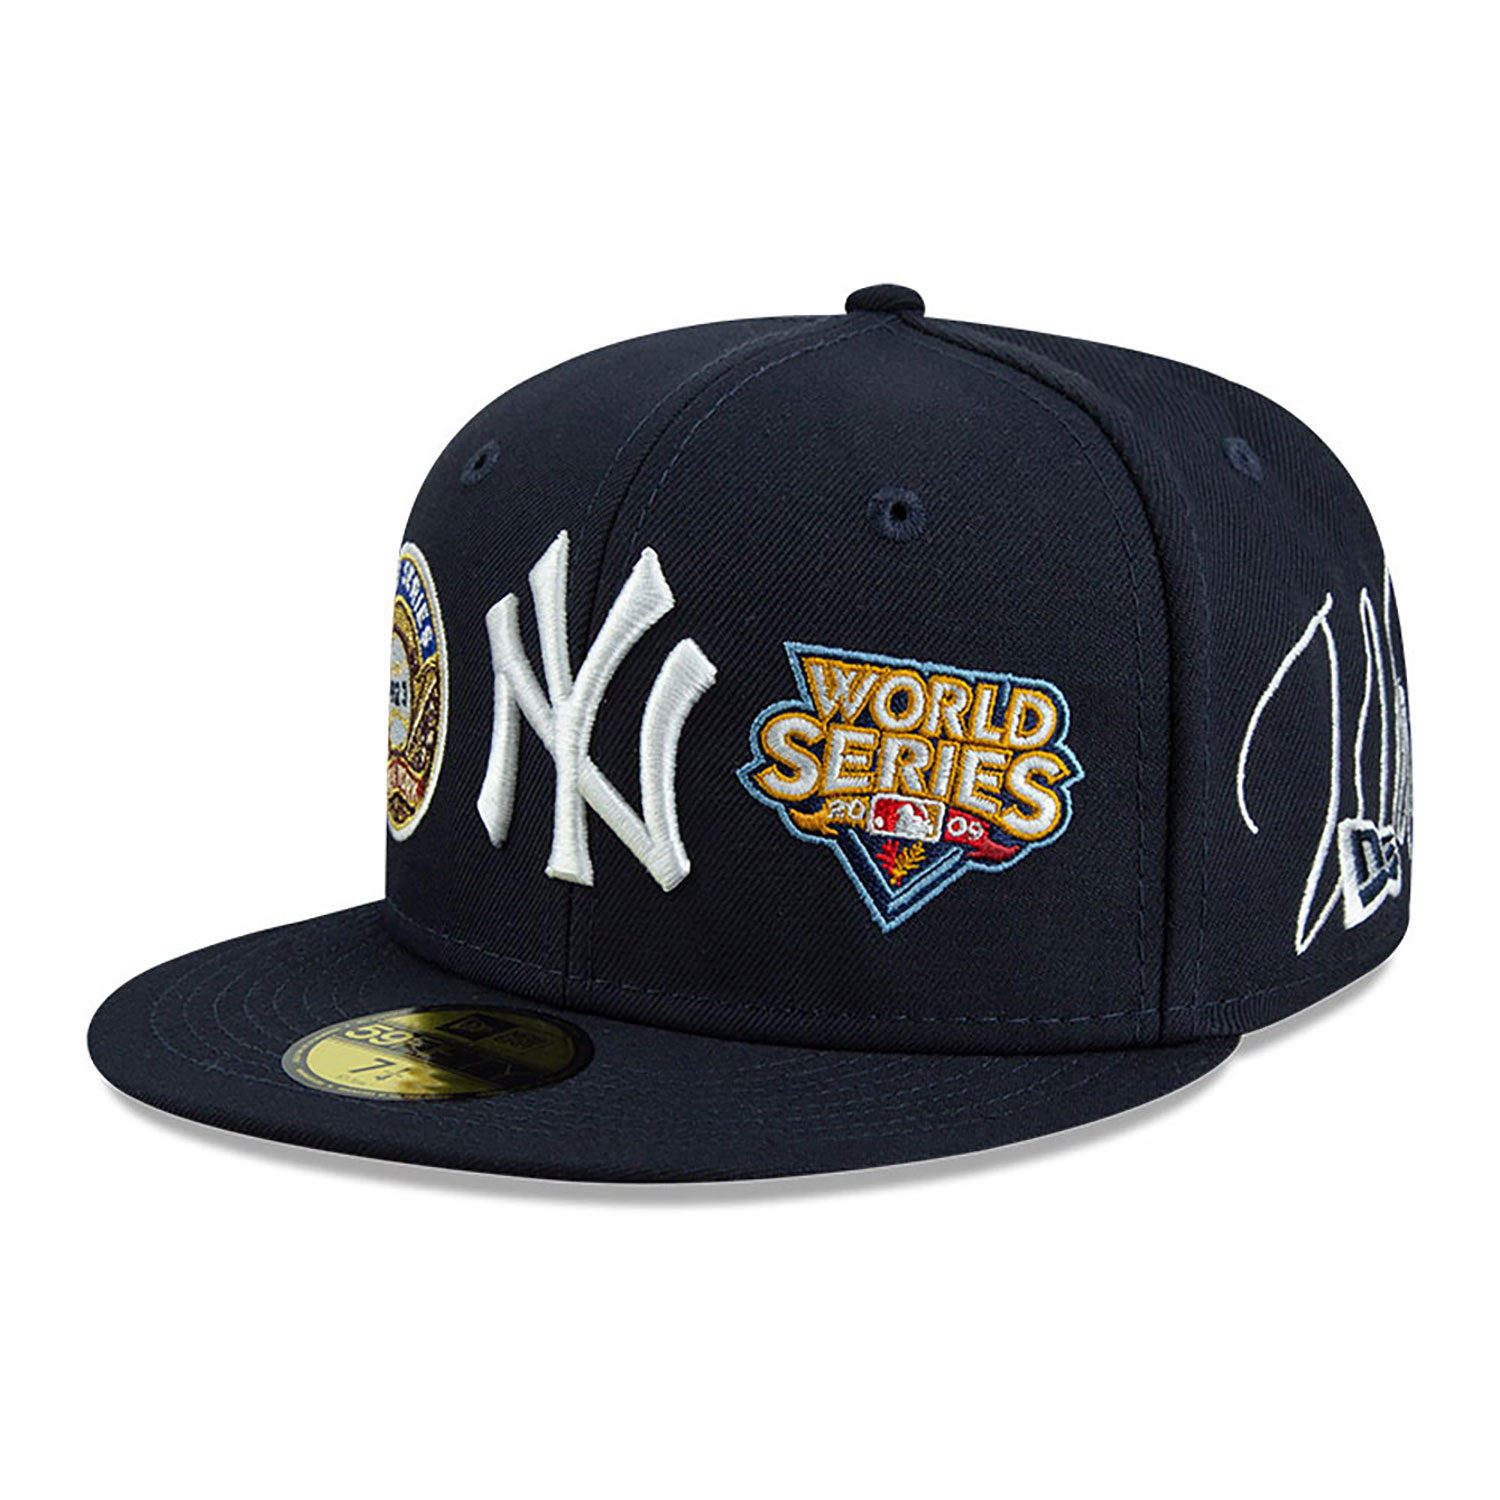 Official New Era New York Yankees Mlb Historic Champs Navy 59fifty Fitted Cap B7401 282 New